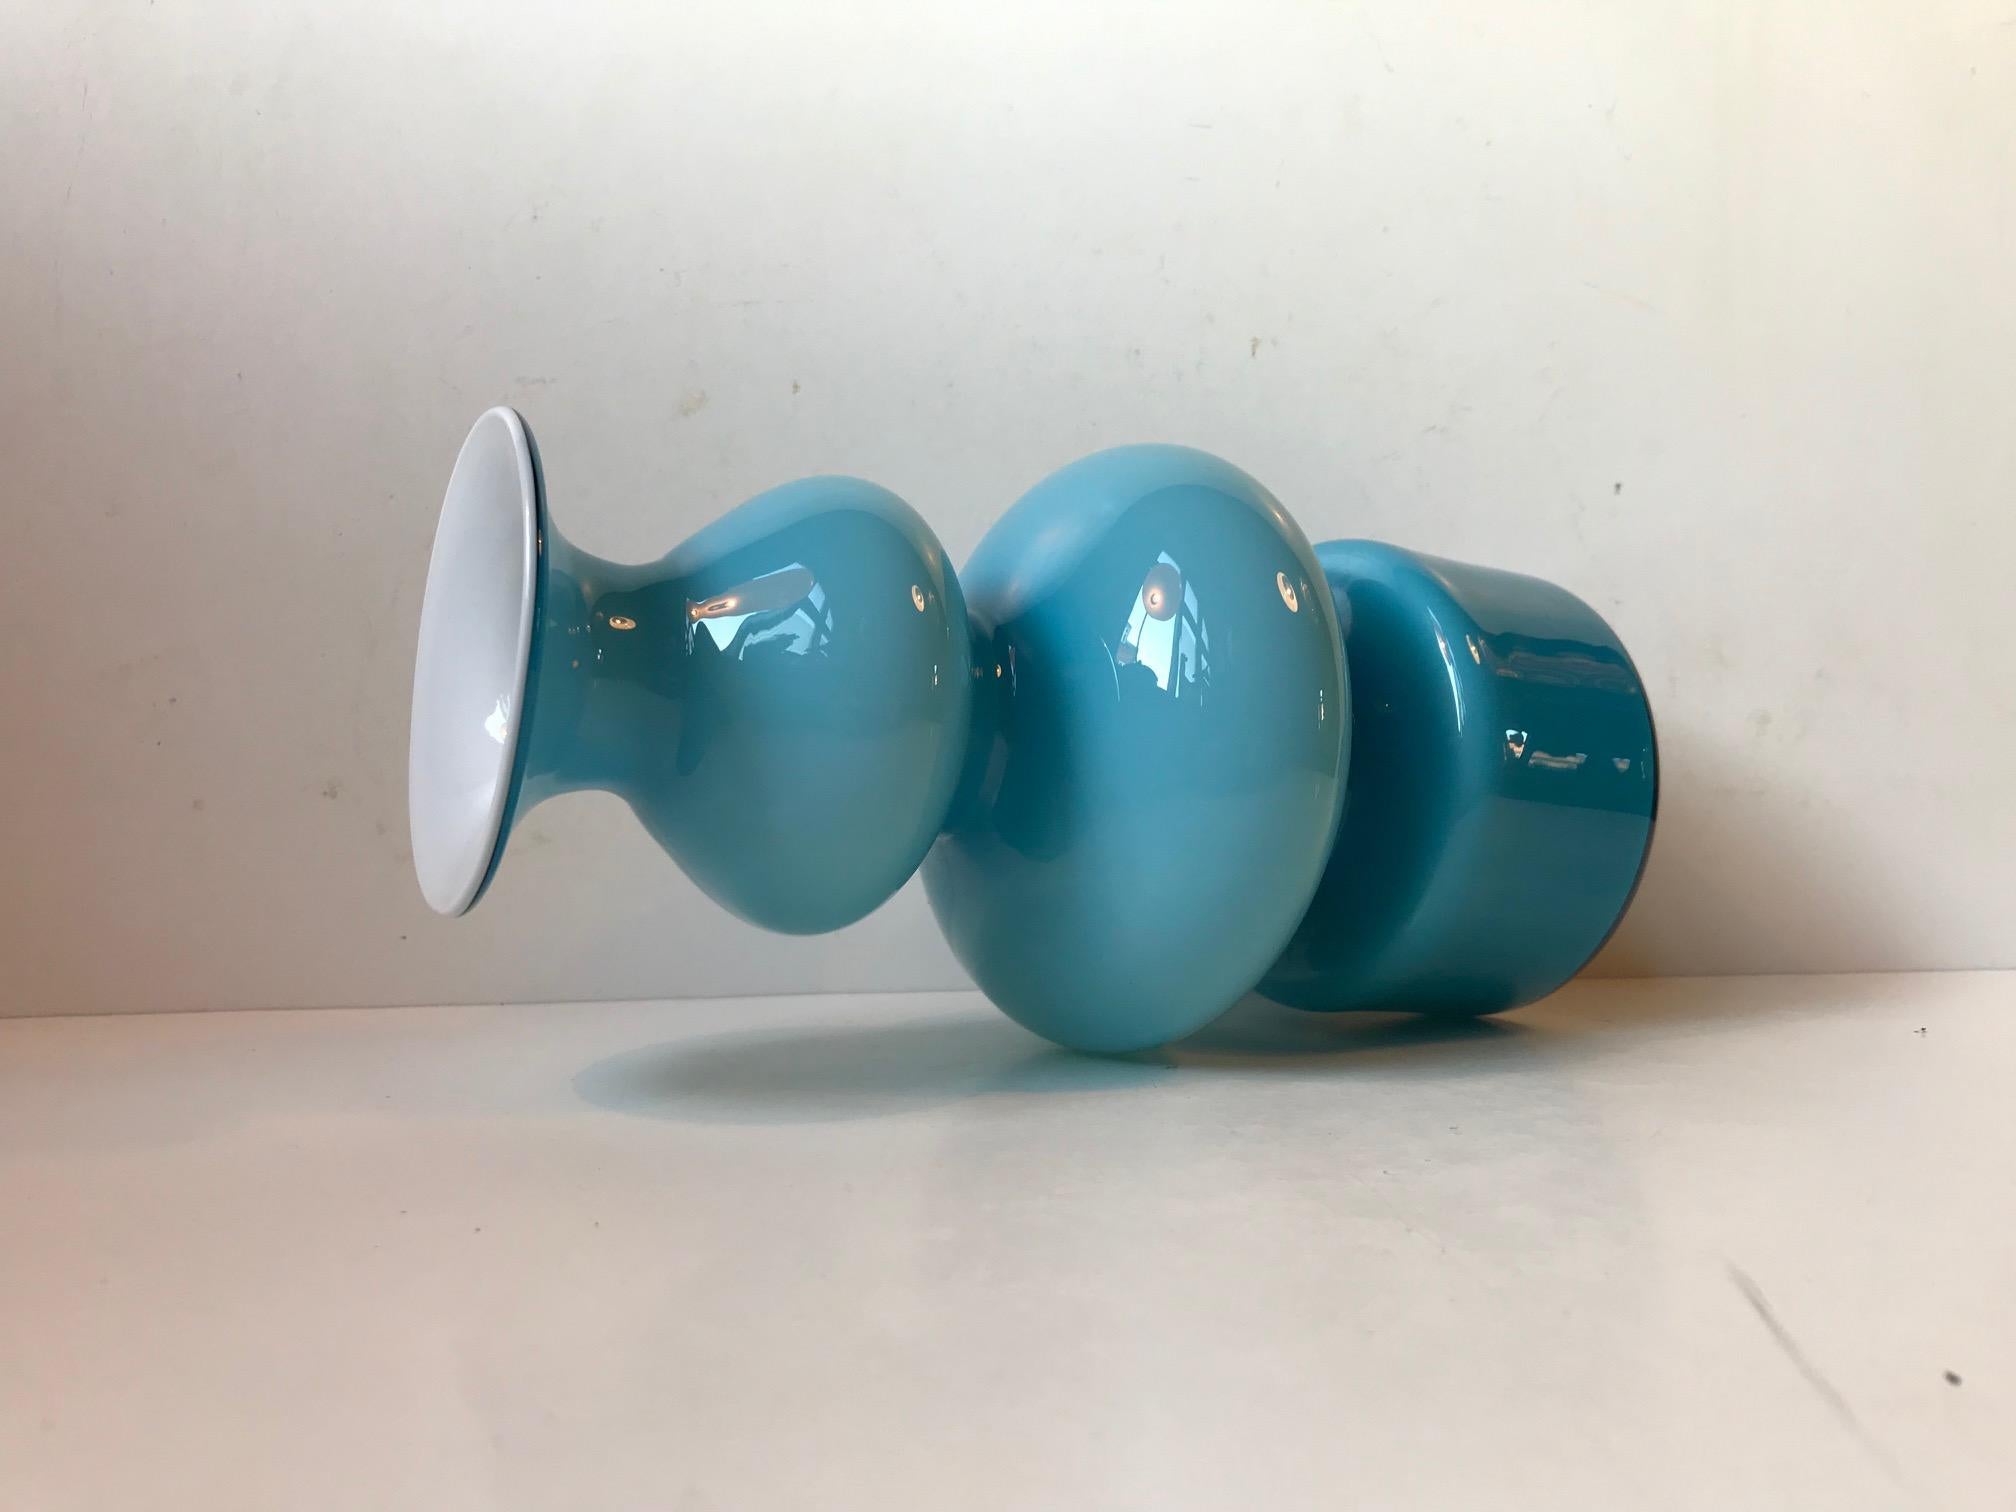 Cased light blue opaline glass vase designed by Per Lütken in 1968 and manufactured by Holmegaard in Denmark until 1976. This color and size in the Carnaby/Palet series is the most sought after.